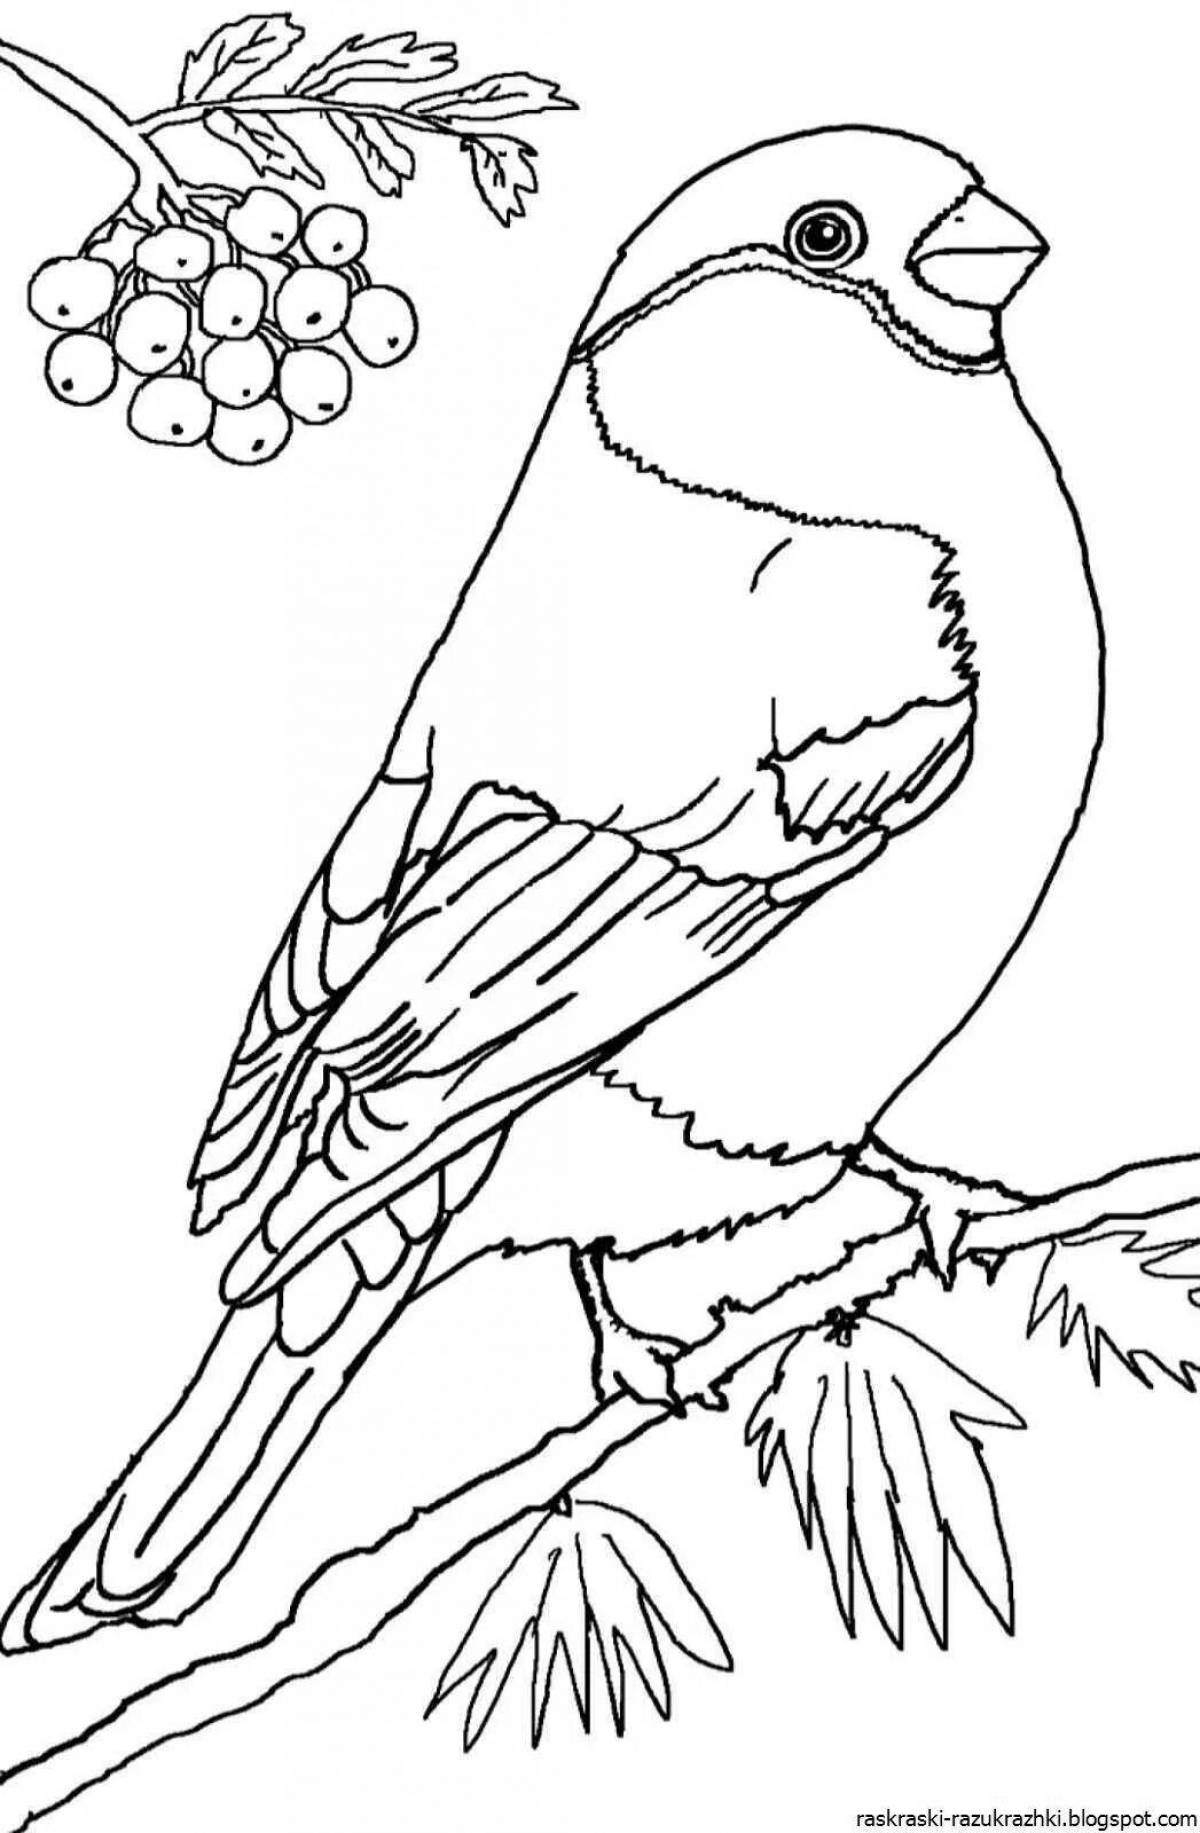 Colouring page with amazing titmouse pattern